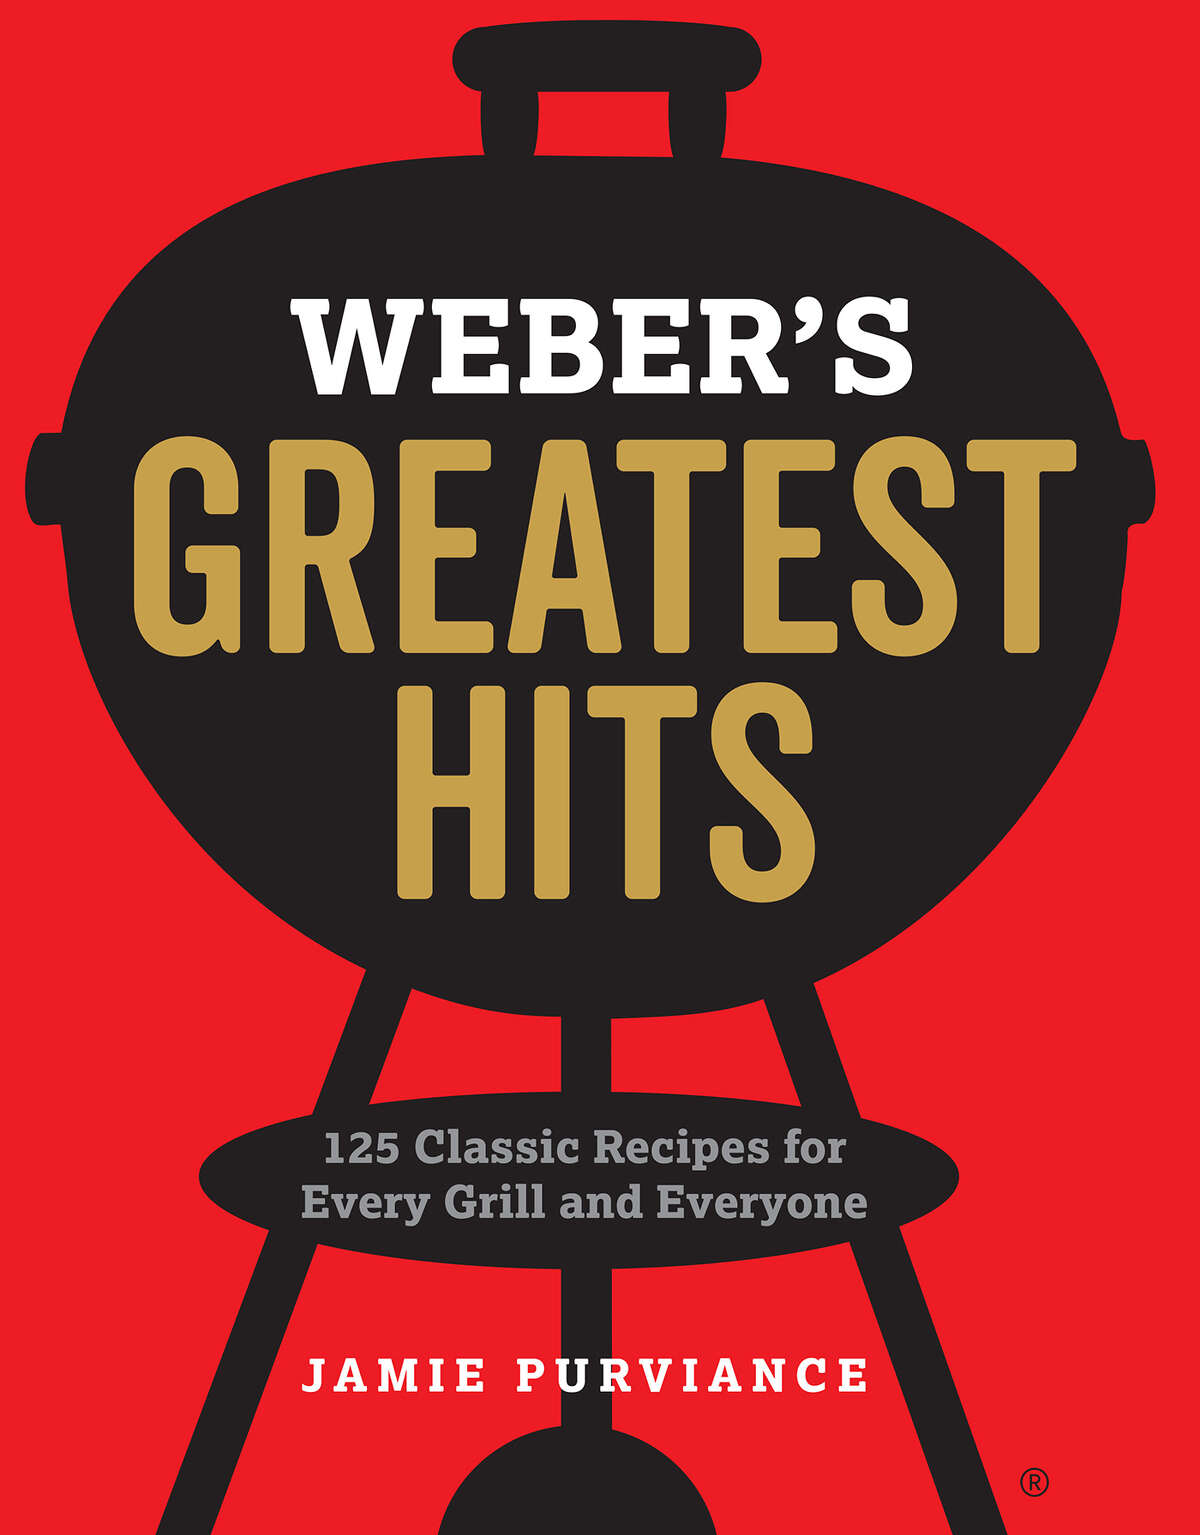 "Weber's Greatest Hits: 125 Classic Recipes for Every Grill and Everyone" by Jamie Purviance.